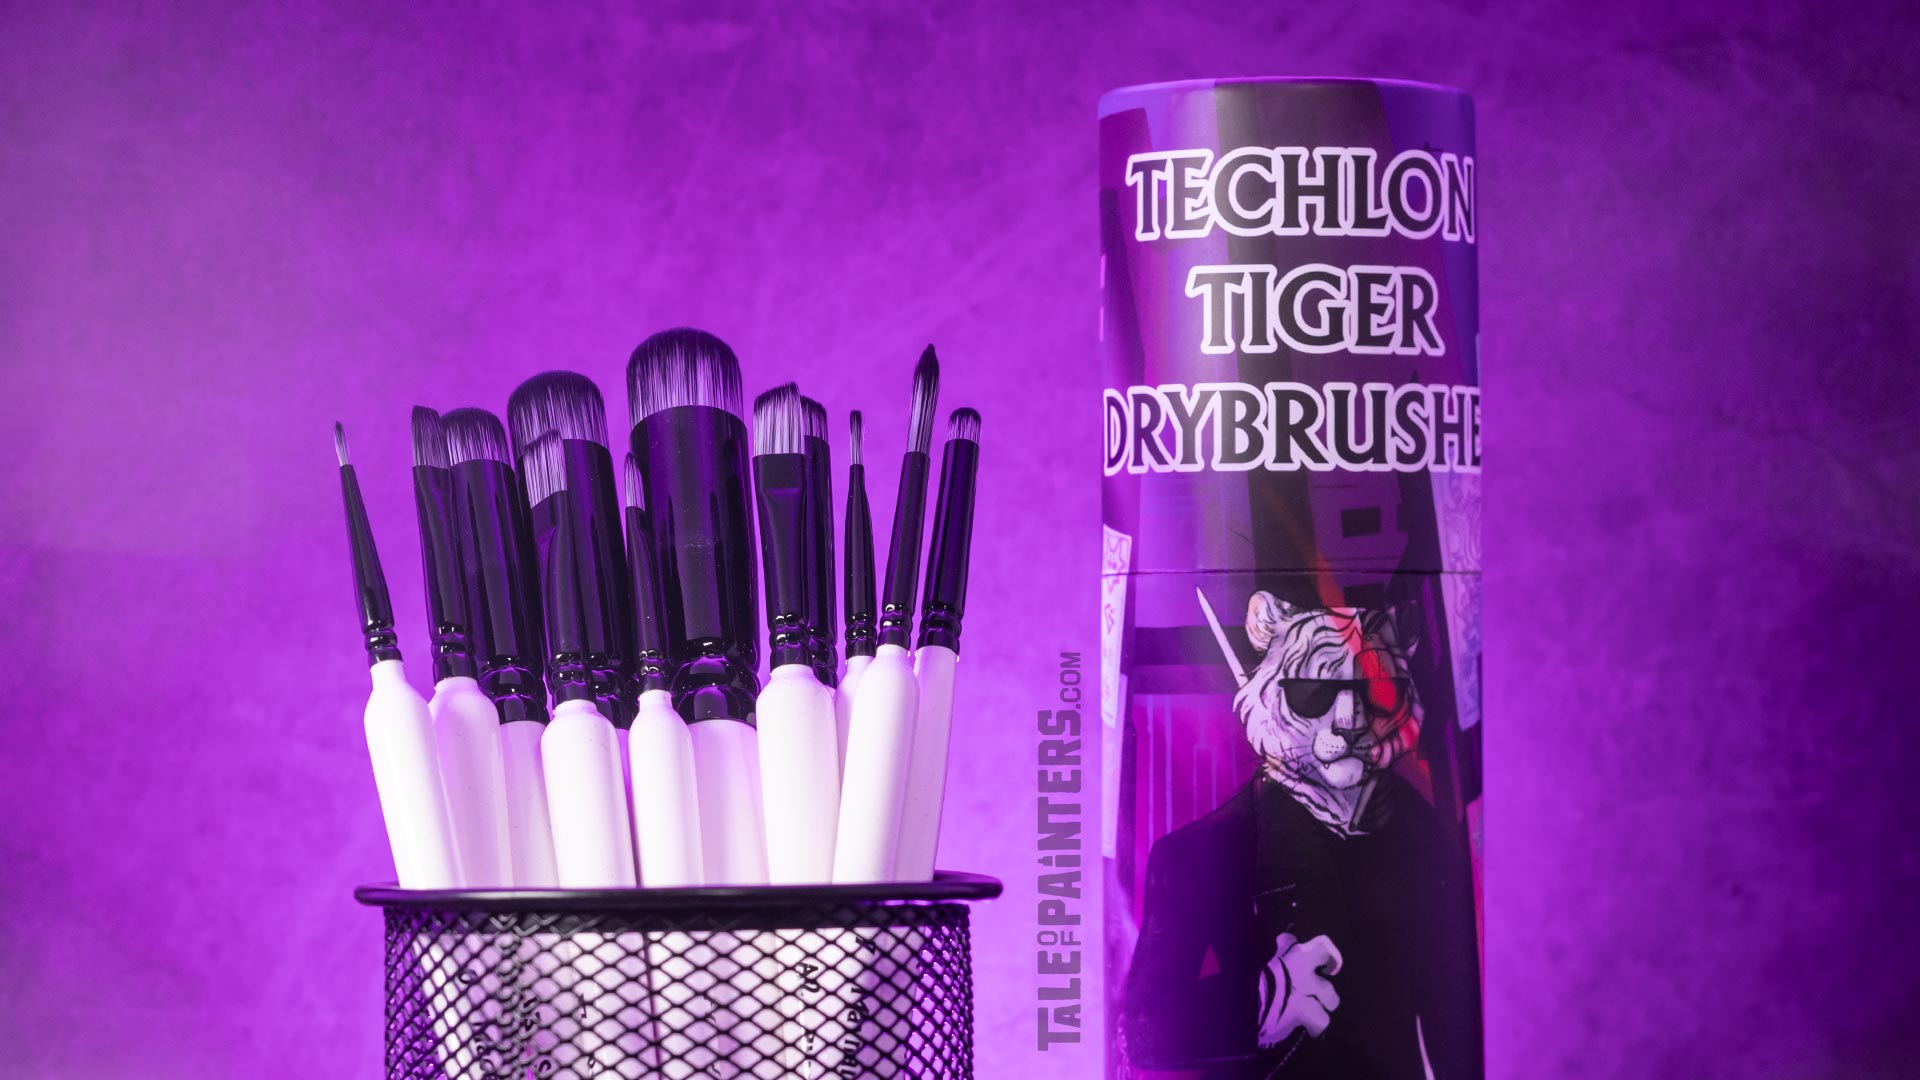 Chronicle Cards' Techlon Tiger Drybrush Set on a purple background, photographed for review purposes